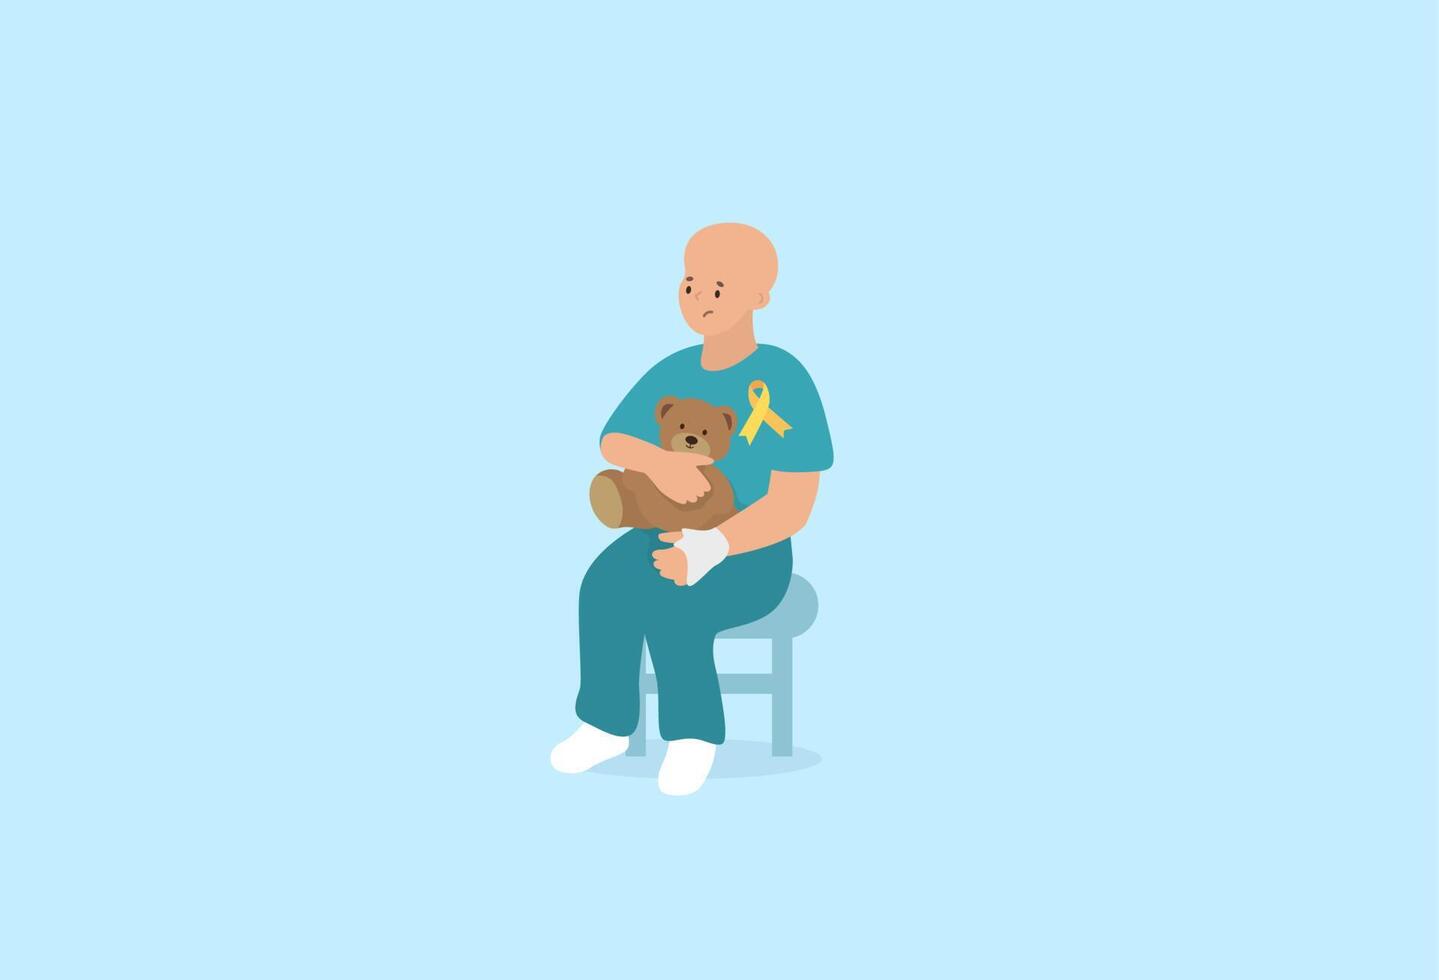 child with cancer sitting on a chair holding a teddy bear vector